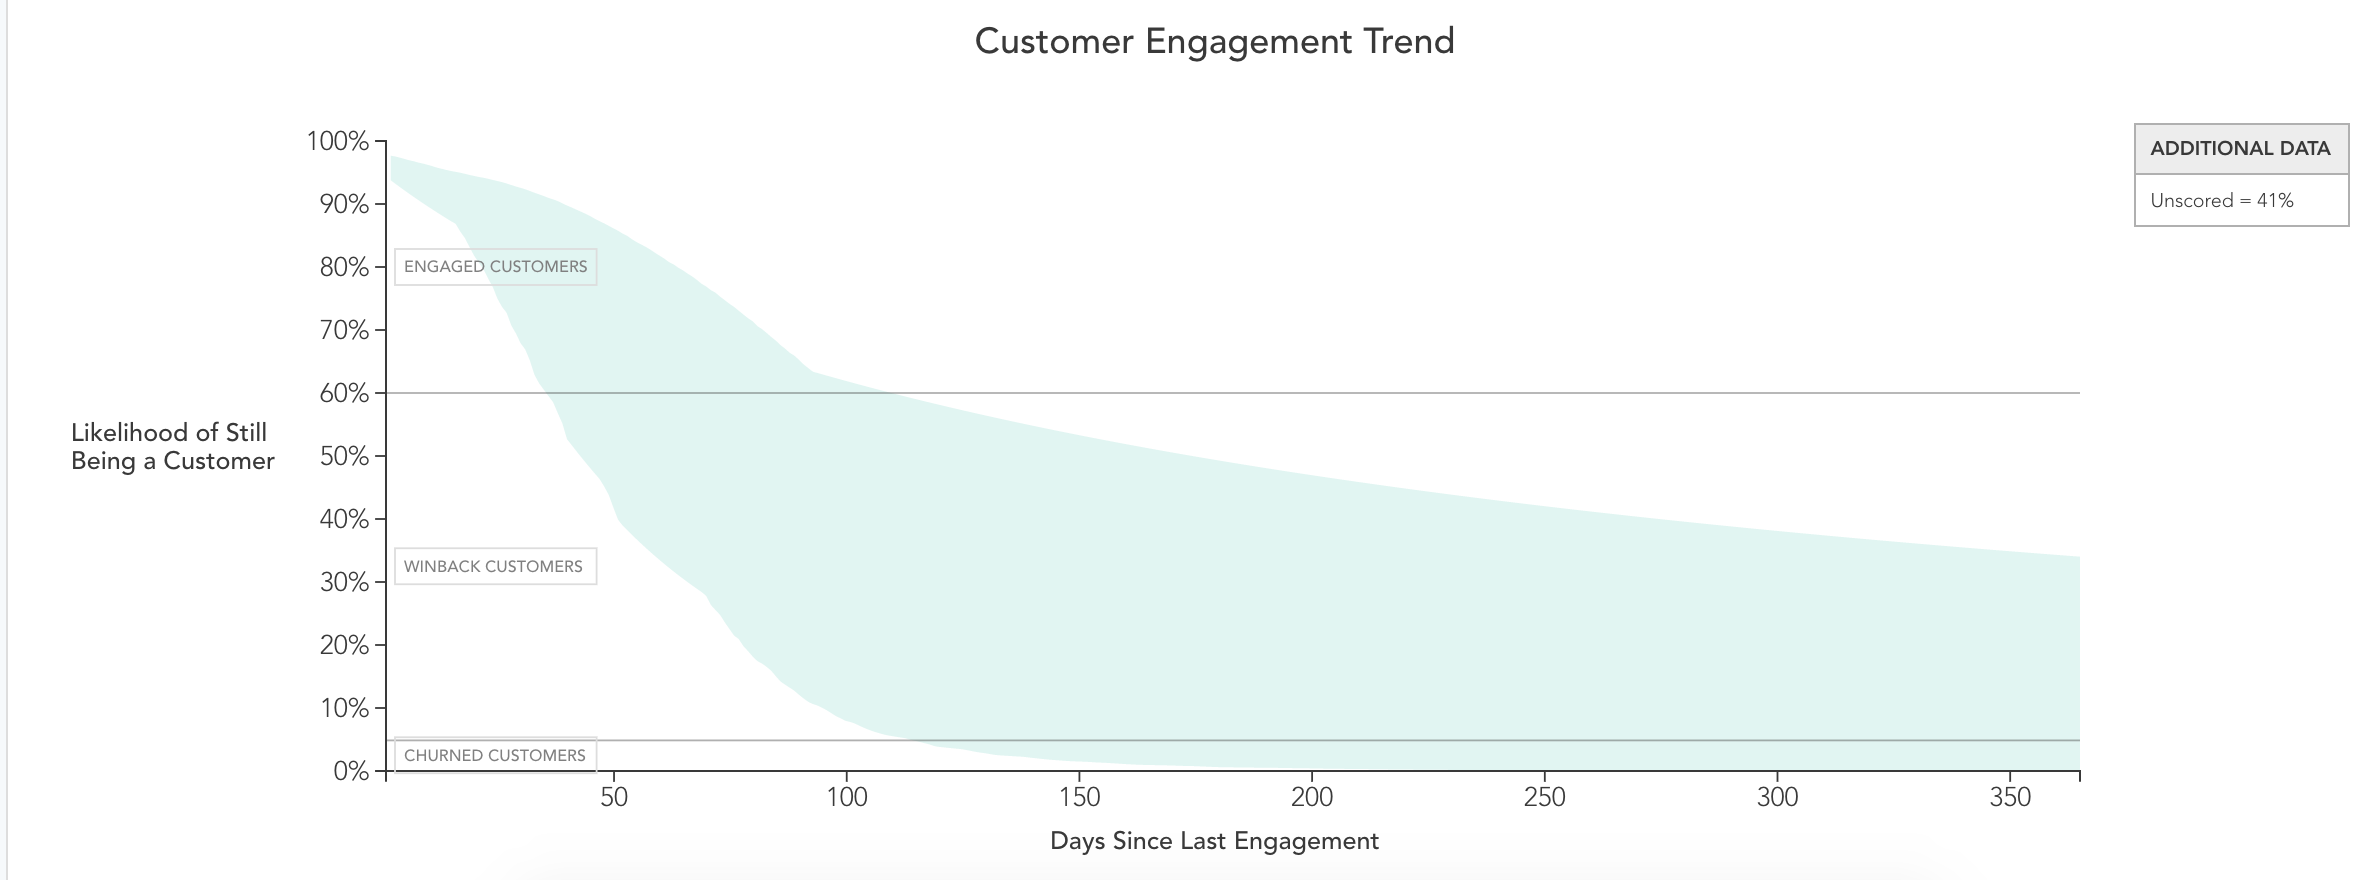 customer-engagement-trend.png